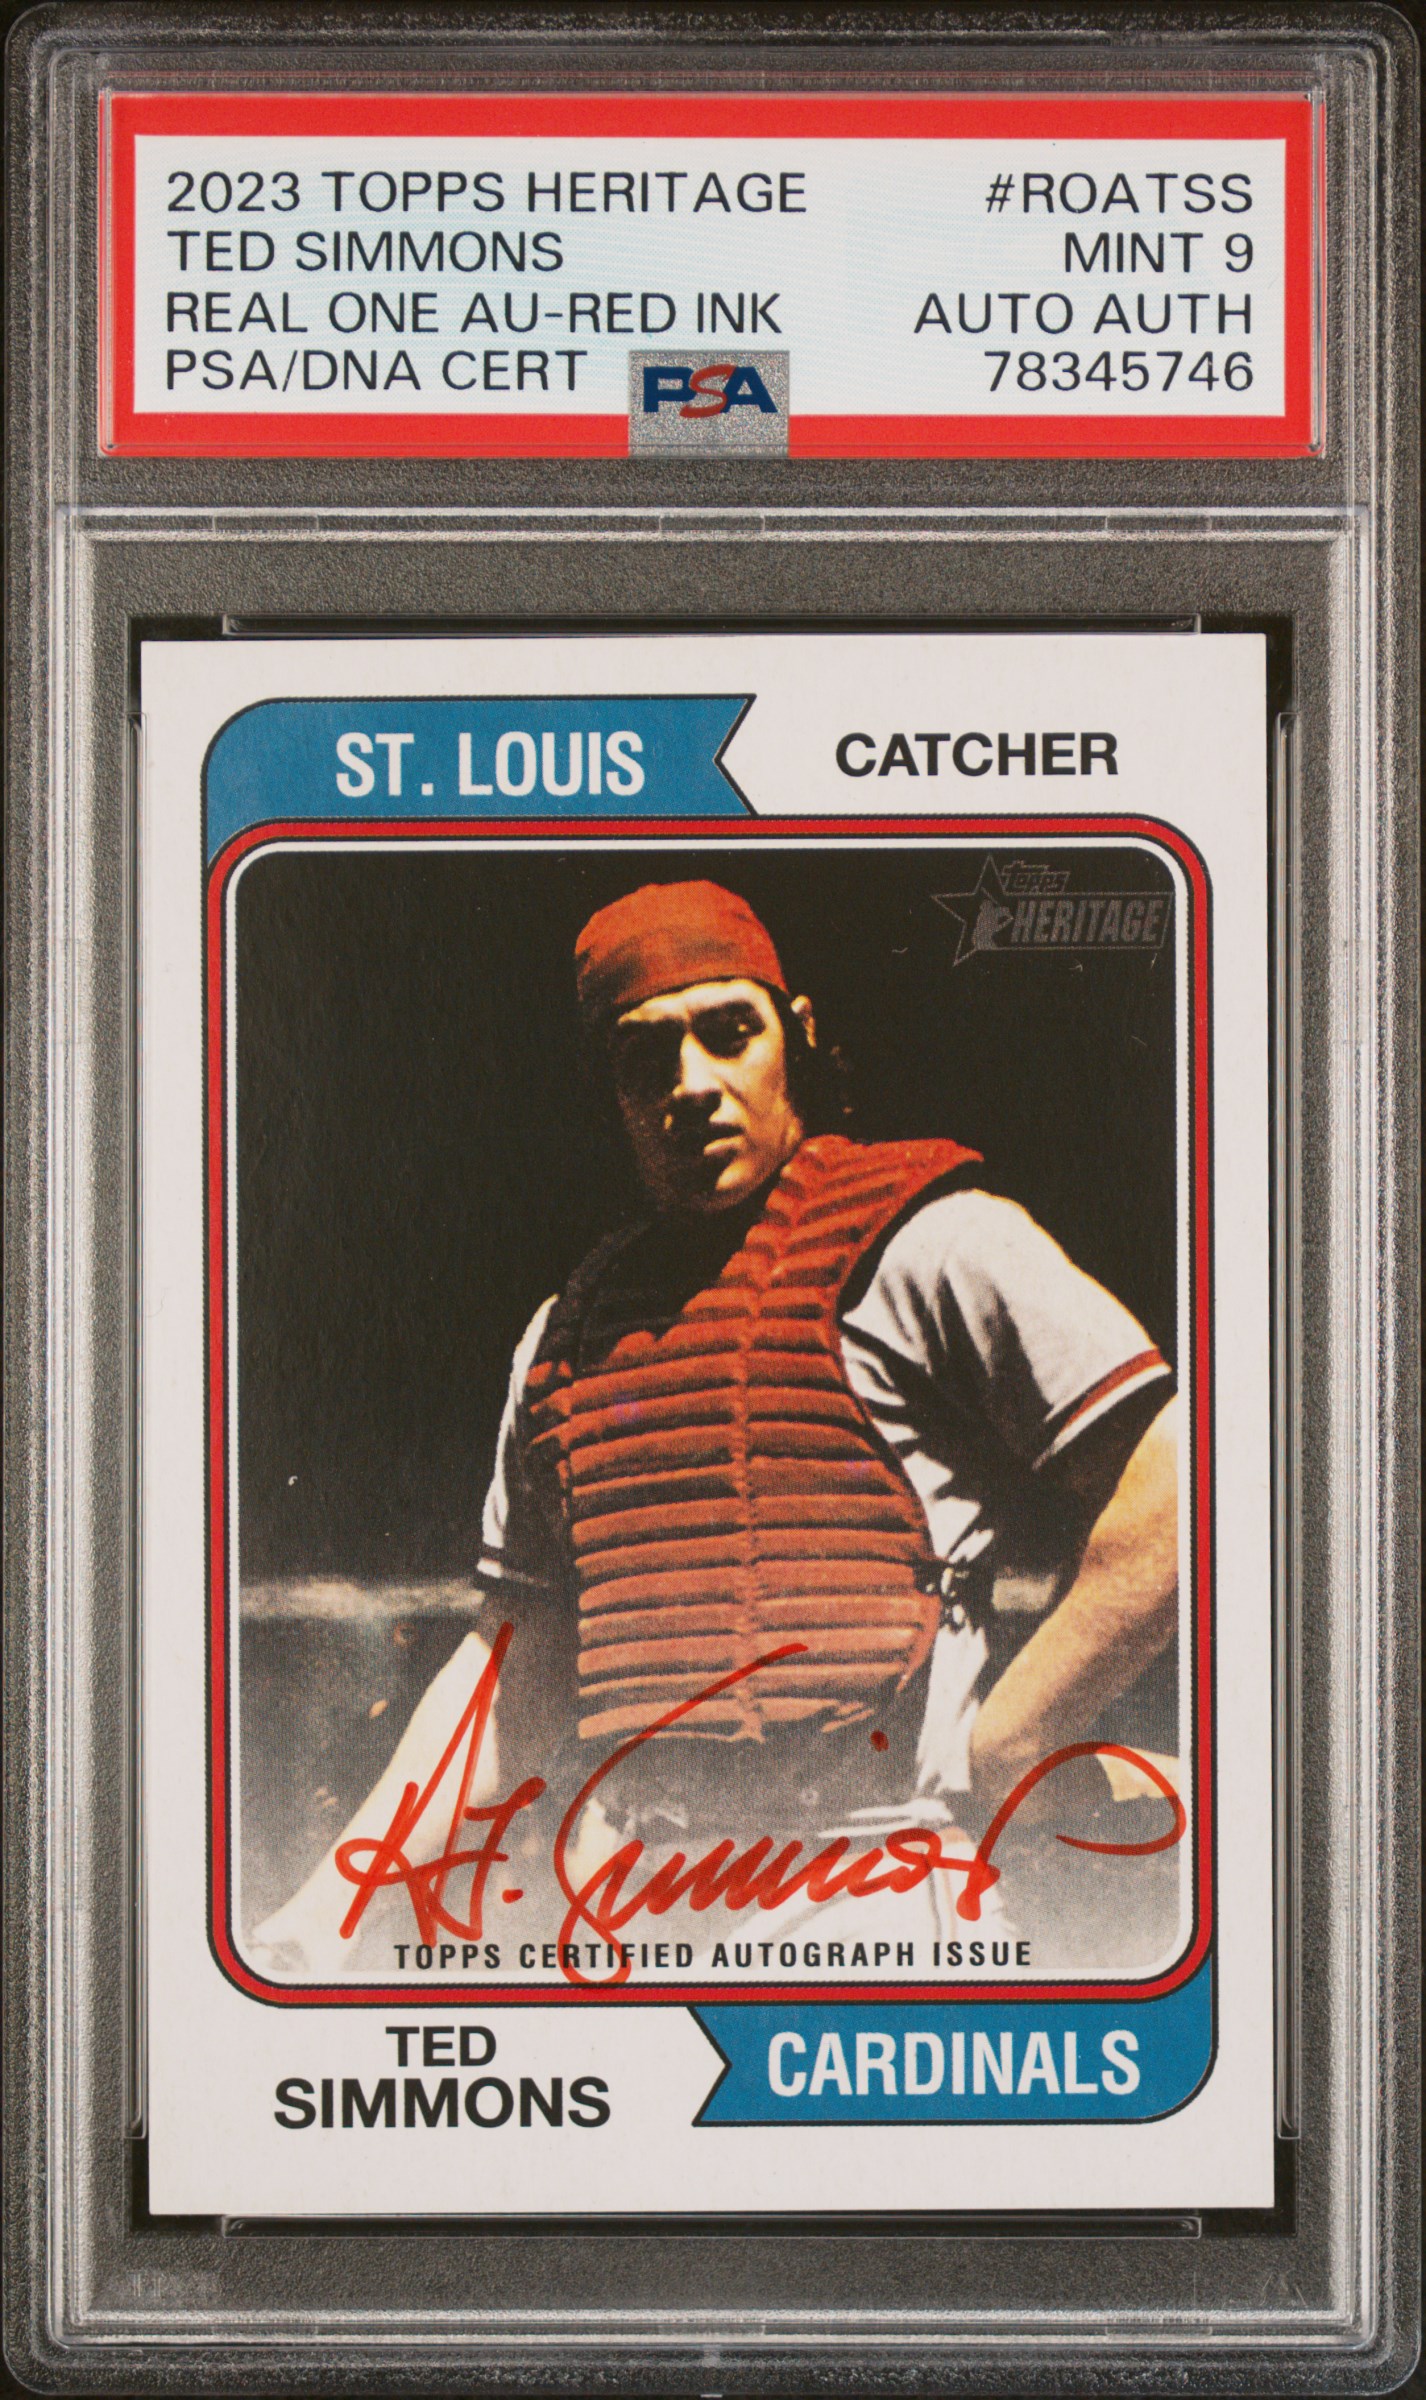 2023 Topps Heritage Real One Autographs Red Ink #ROA-TSS Ted Simmons Signed Card (#18/74) – PSA MINT 9, PSA/DNA Authentic